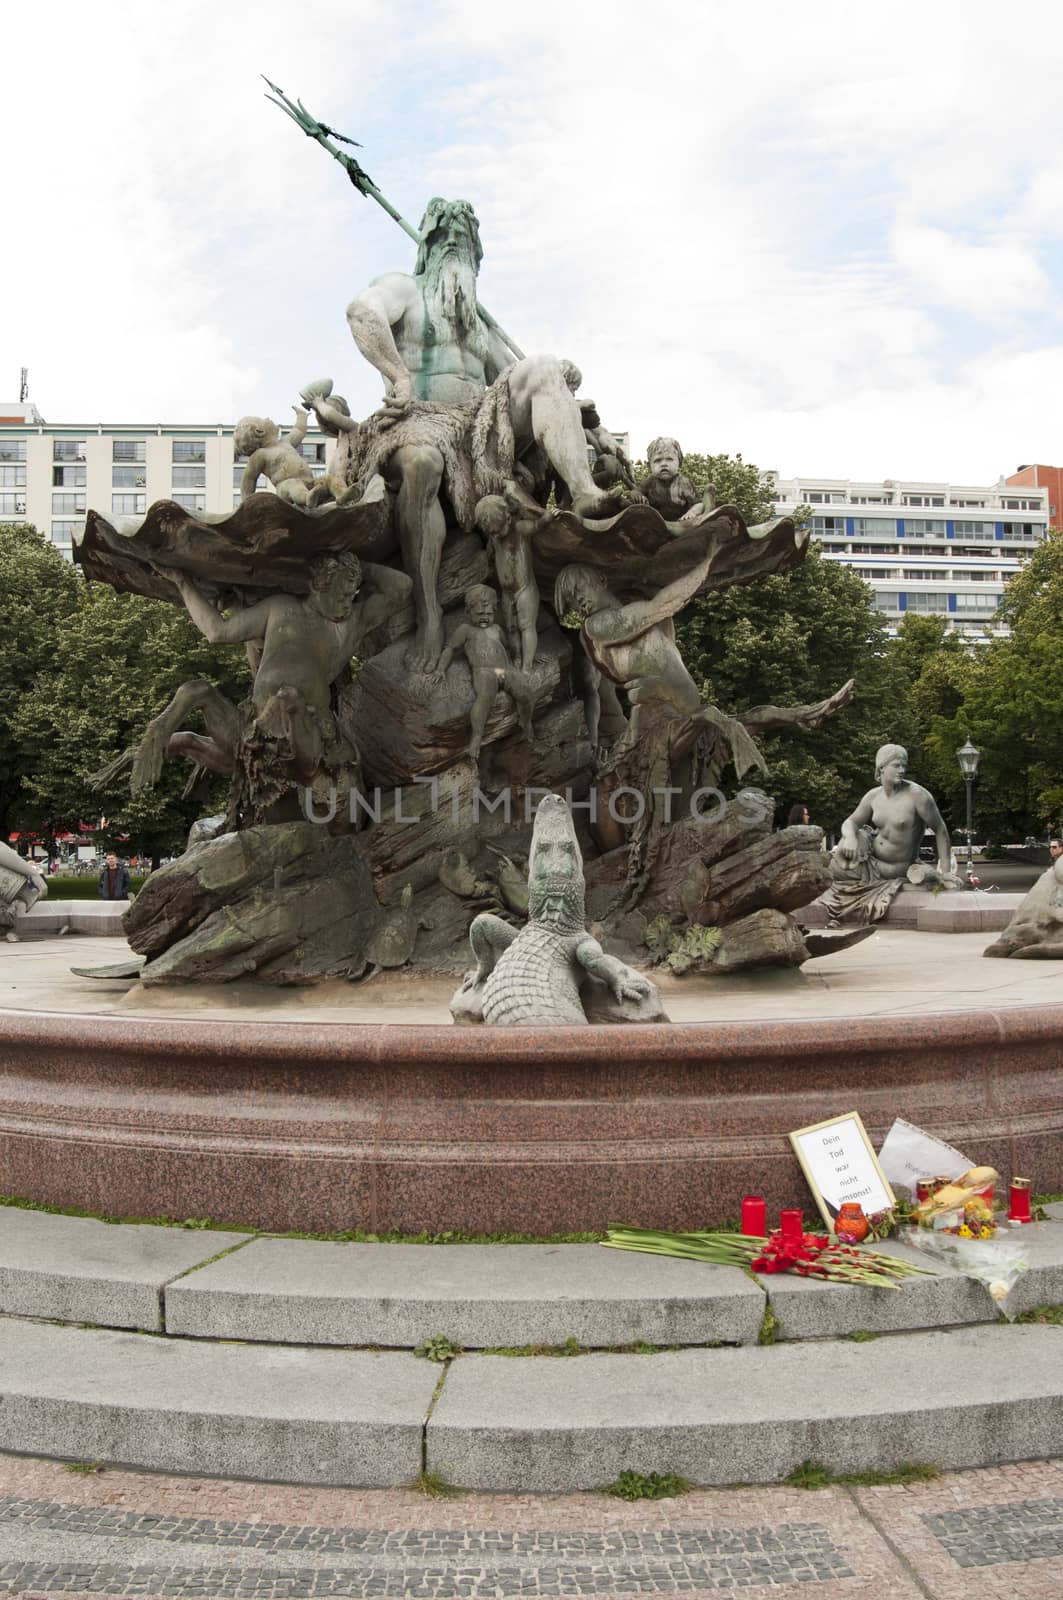 The Neptune Fountain in Berlin was built in 1891 and was designed by Reinhold Begas. The Roman god Neptune is in the center. The four women around him represent the four main rivers of Prussia: Elbe, Rhine, Vistula, and Oder.